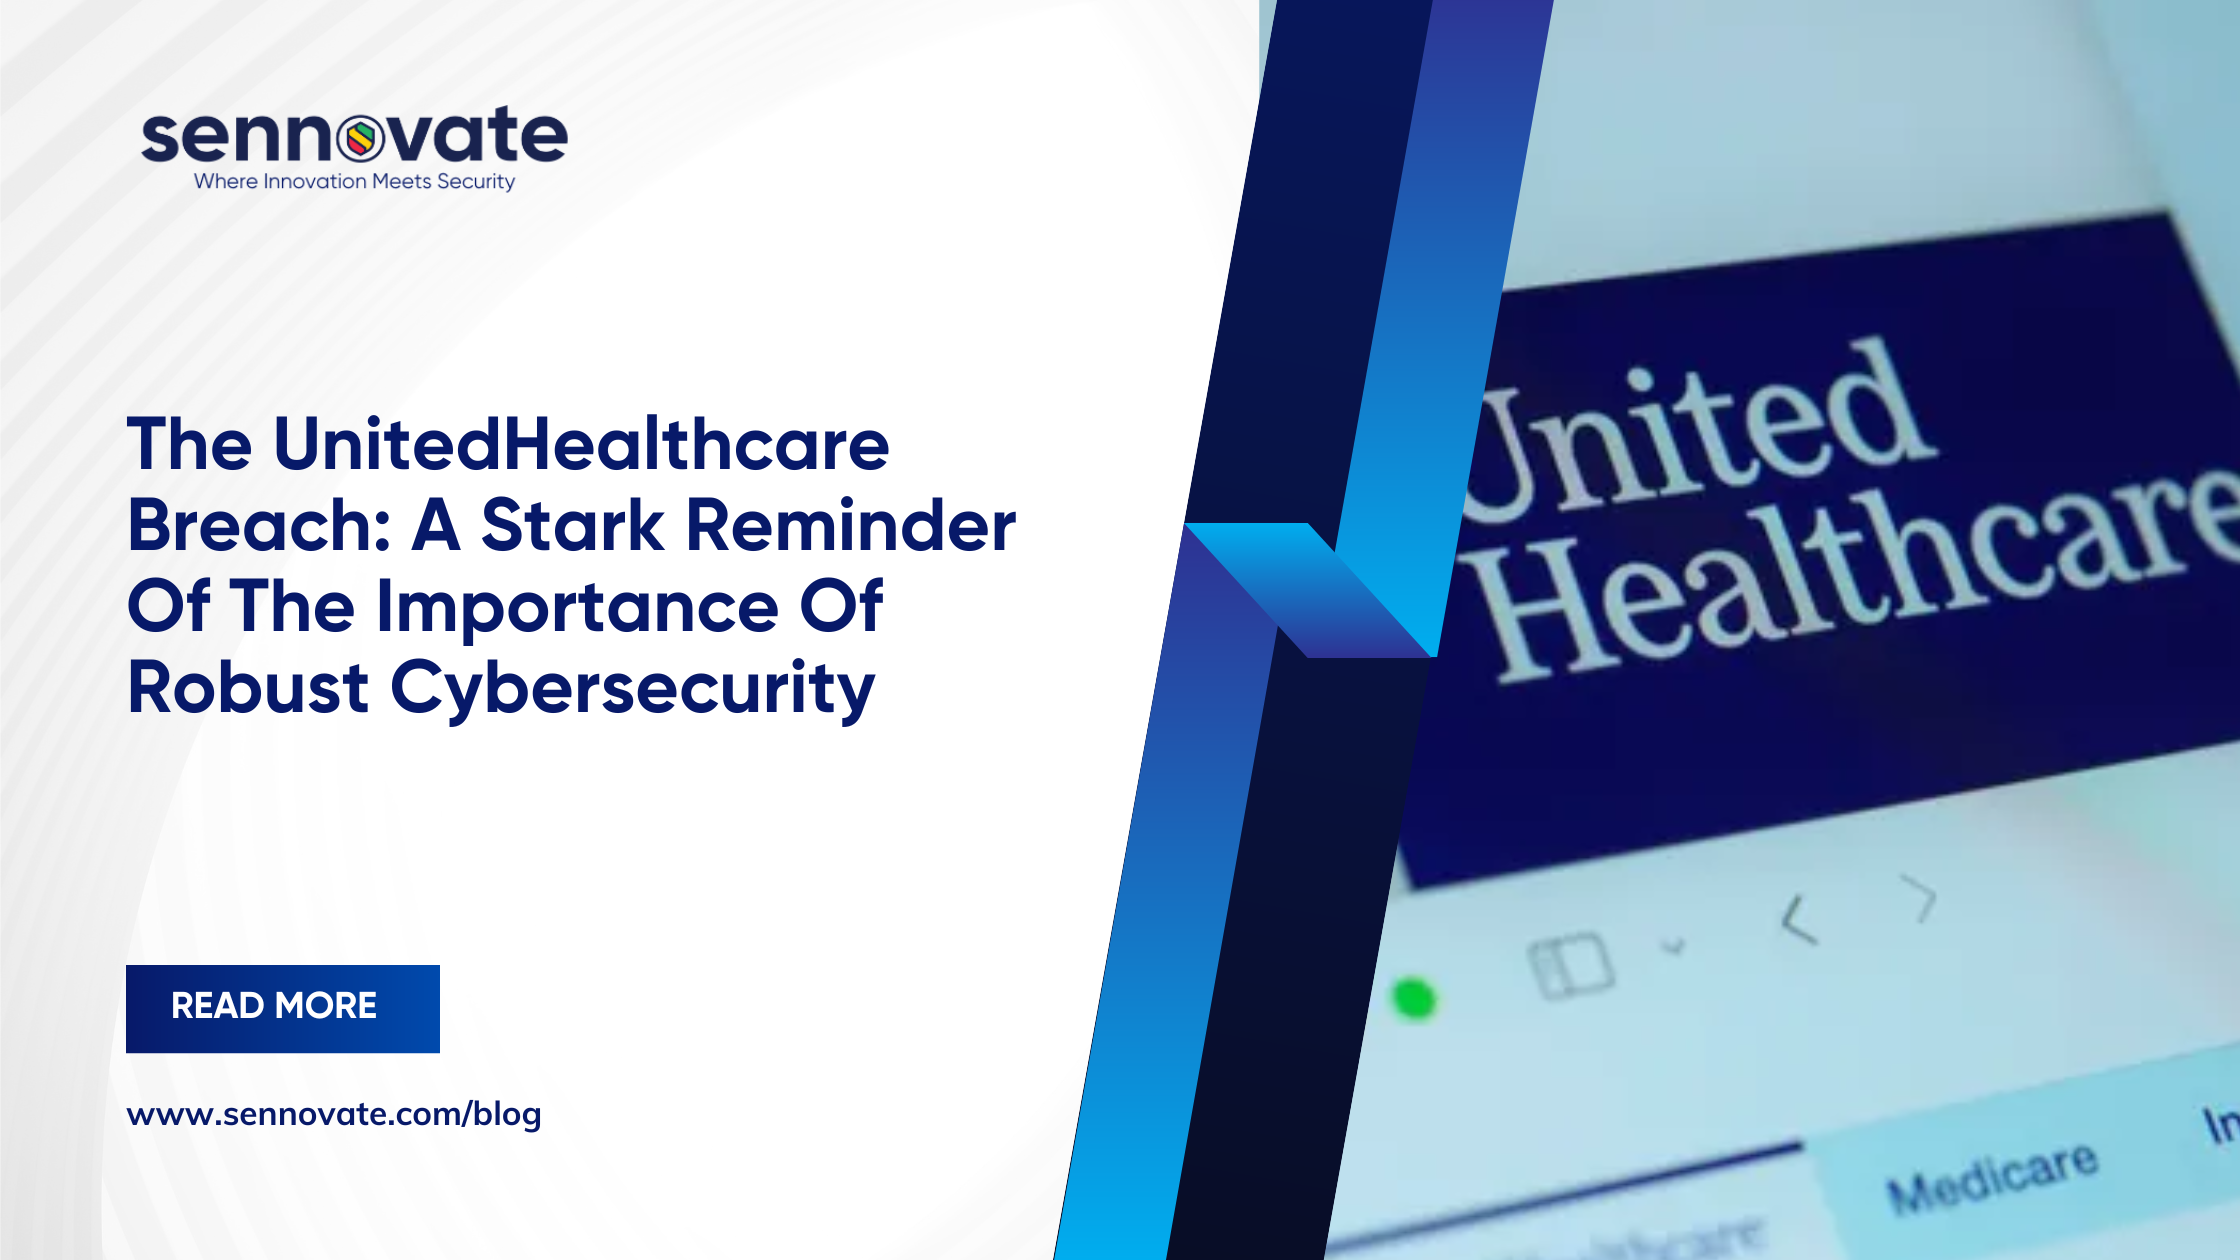 The UnitedHealthcare Breach A Stark Reminder Of The Importance Of Robust Cybersecurity